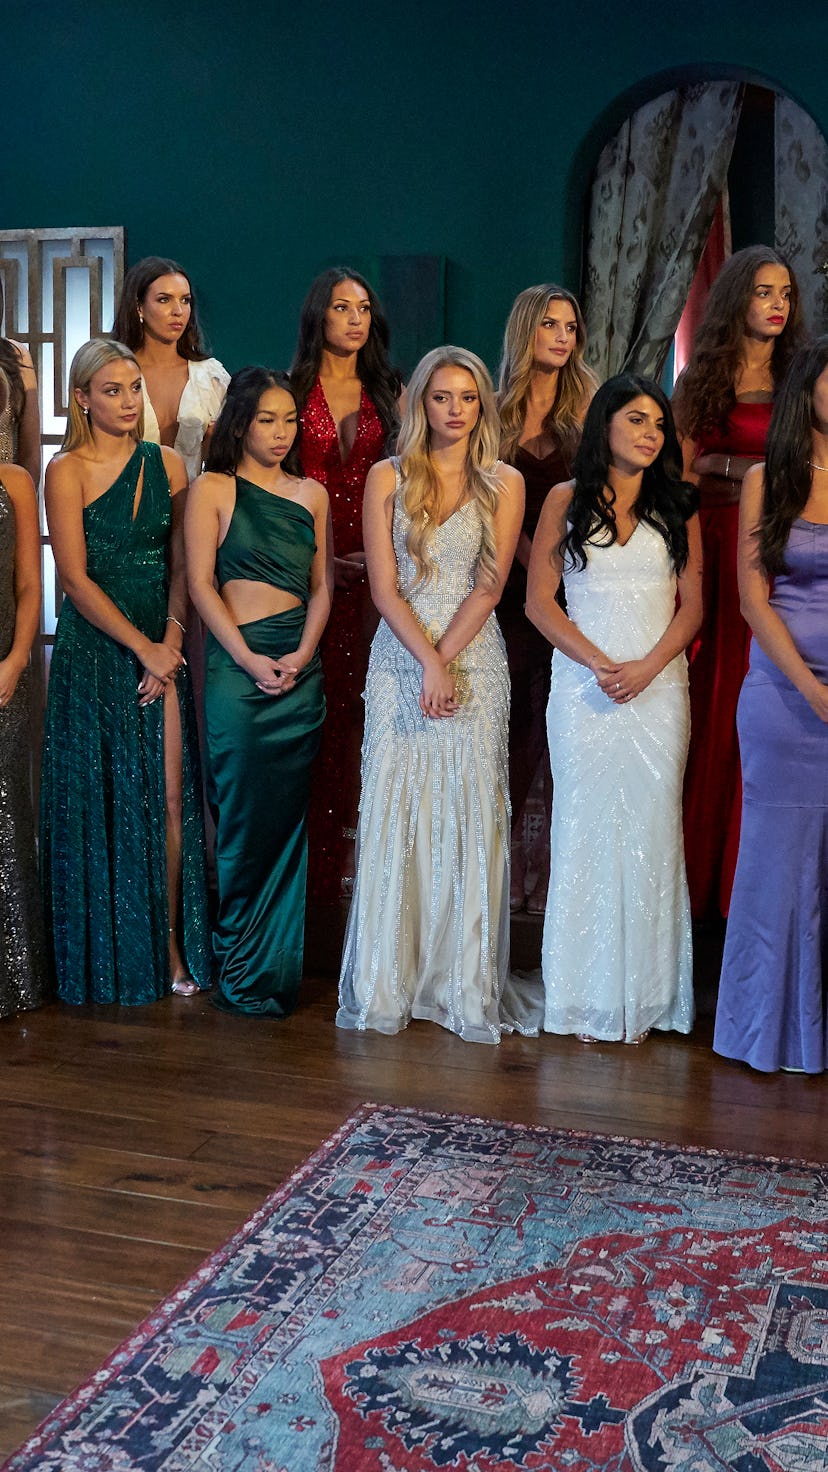 Zach's 'Bachelor' season made its debut on Jan. 23 — and so did dozens of beautiful dresses (includi...